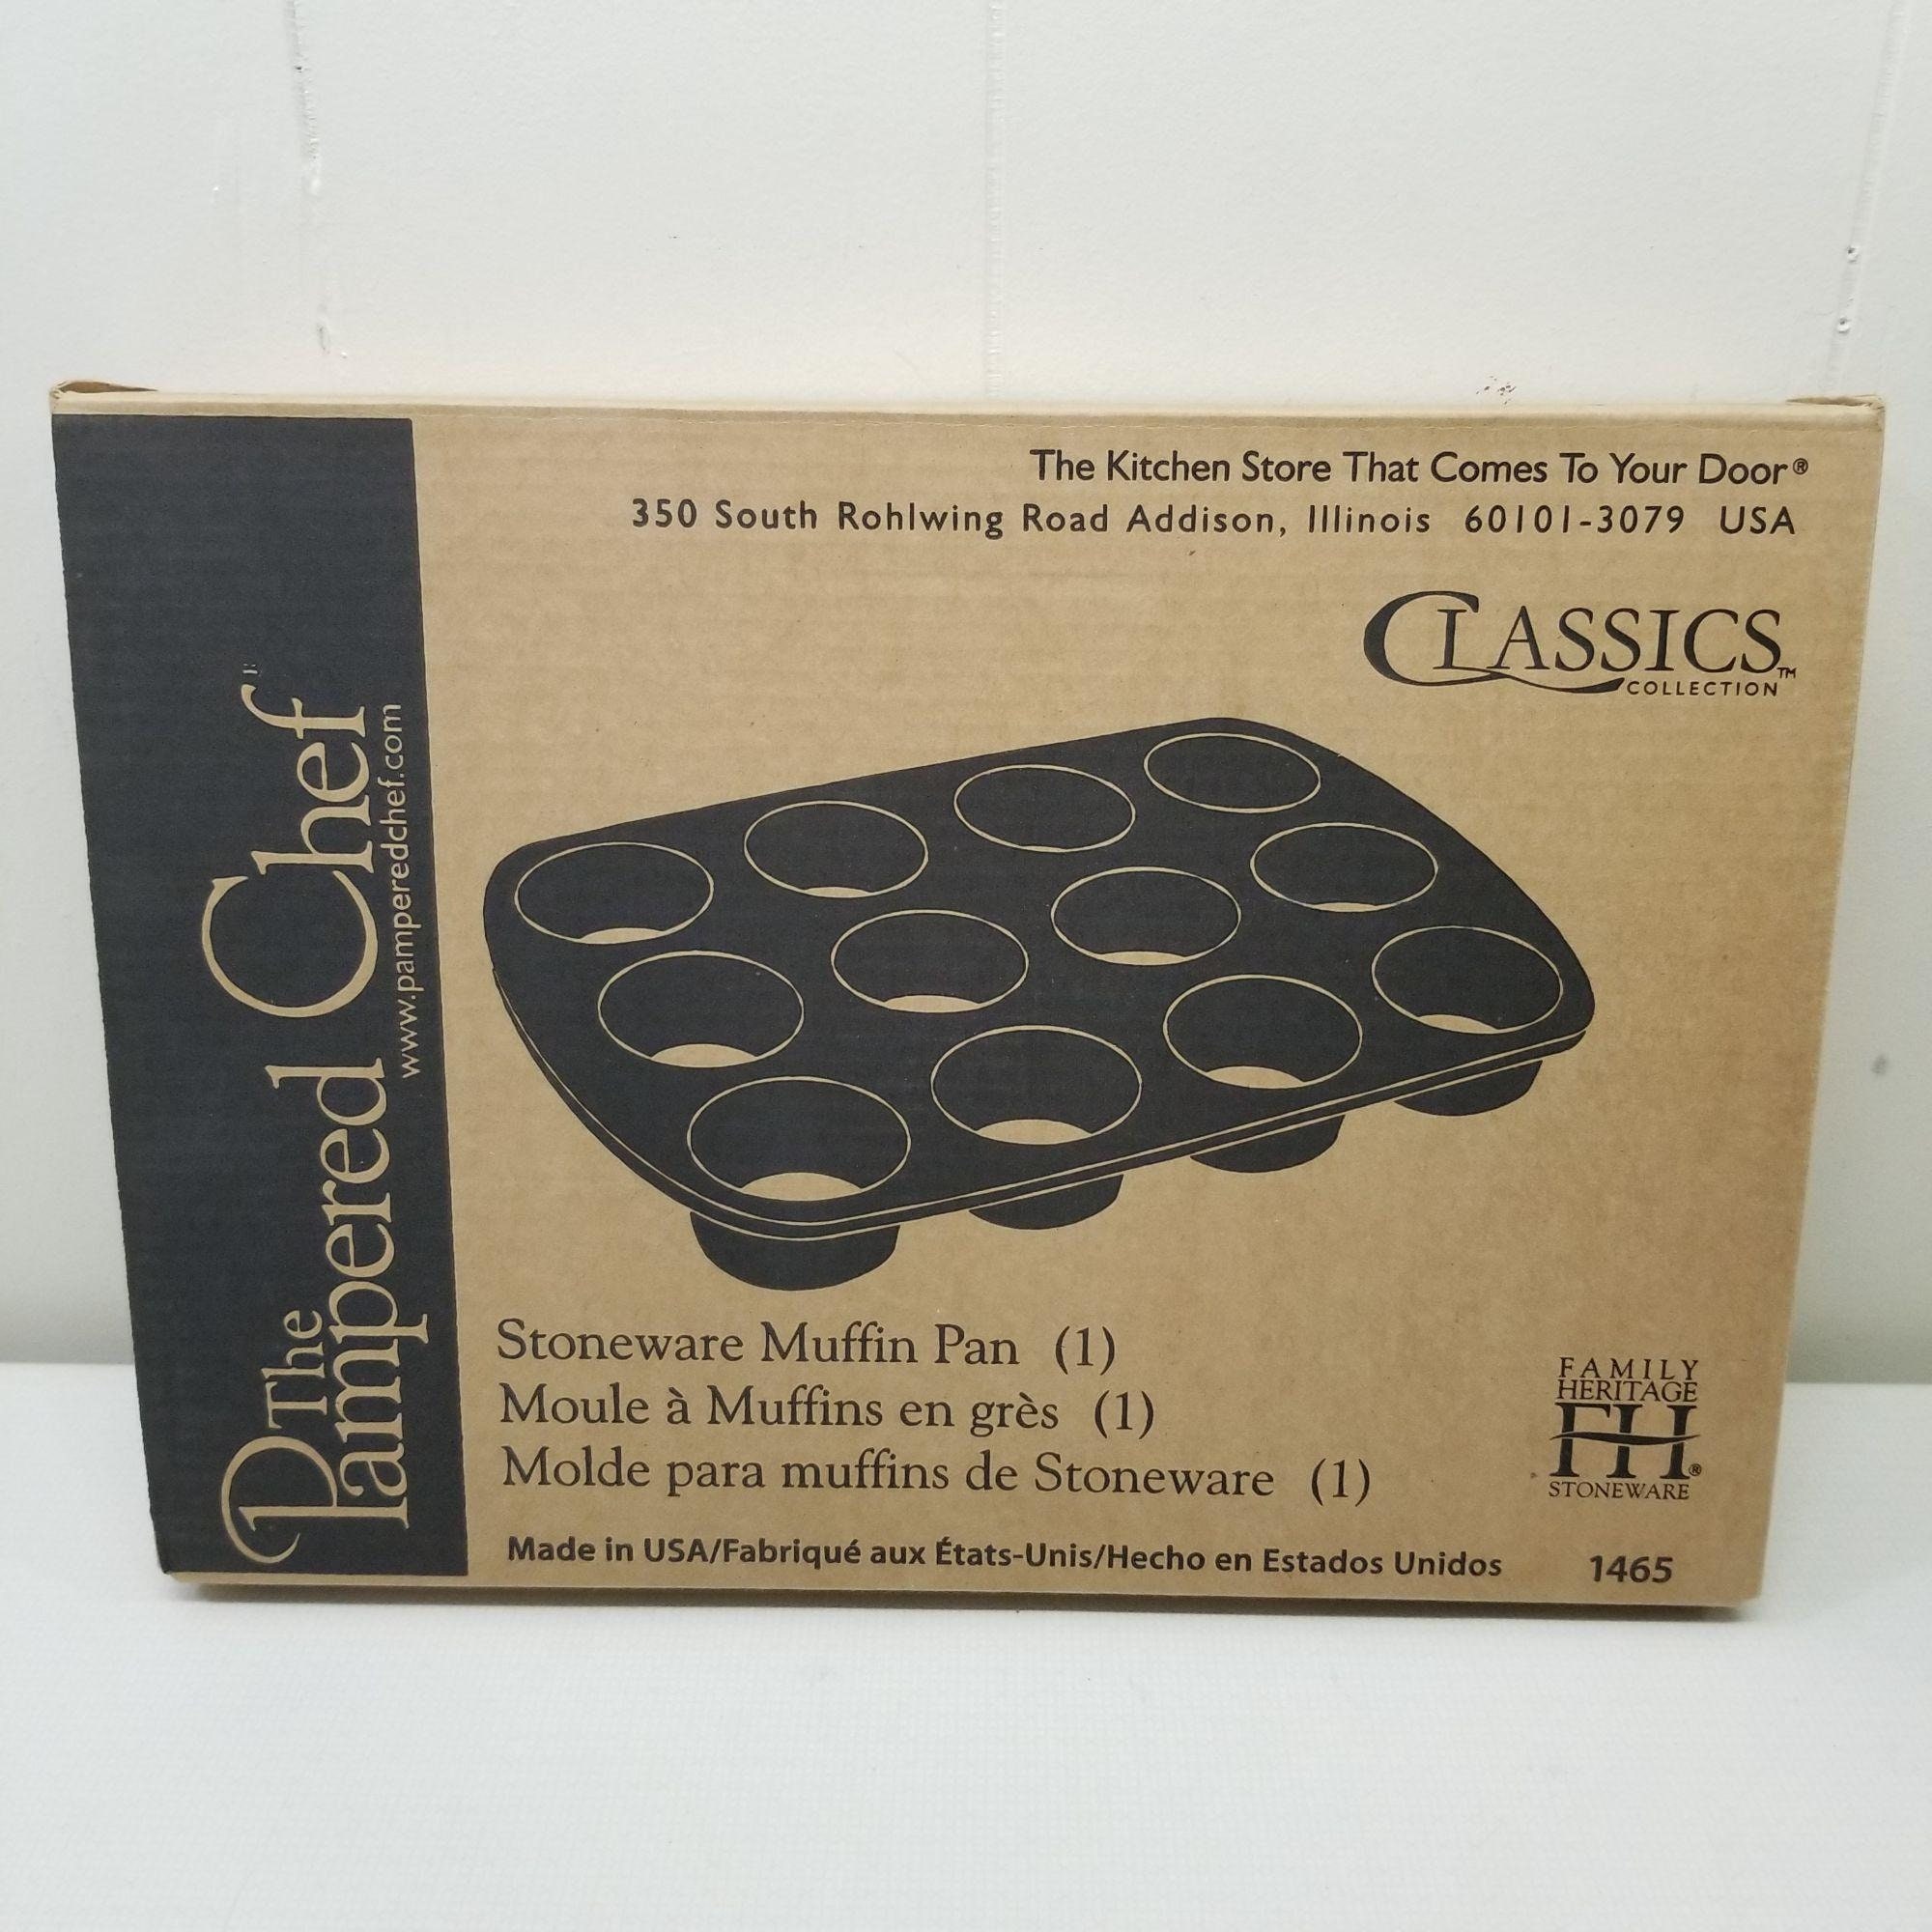 The Pampered Chef Cupcake Muffin Pan 12 Count 1465 Stoneware